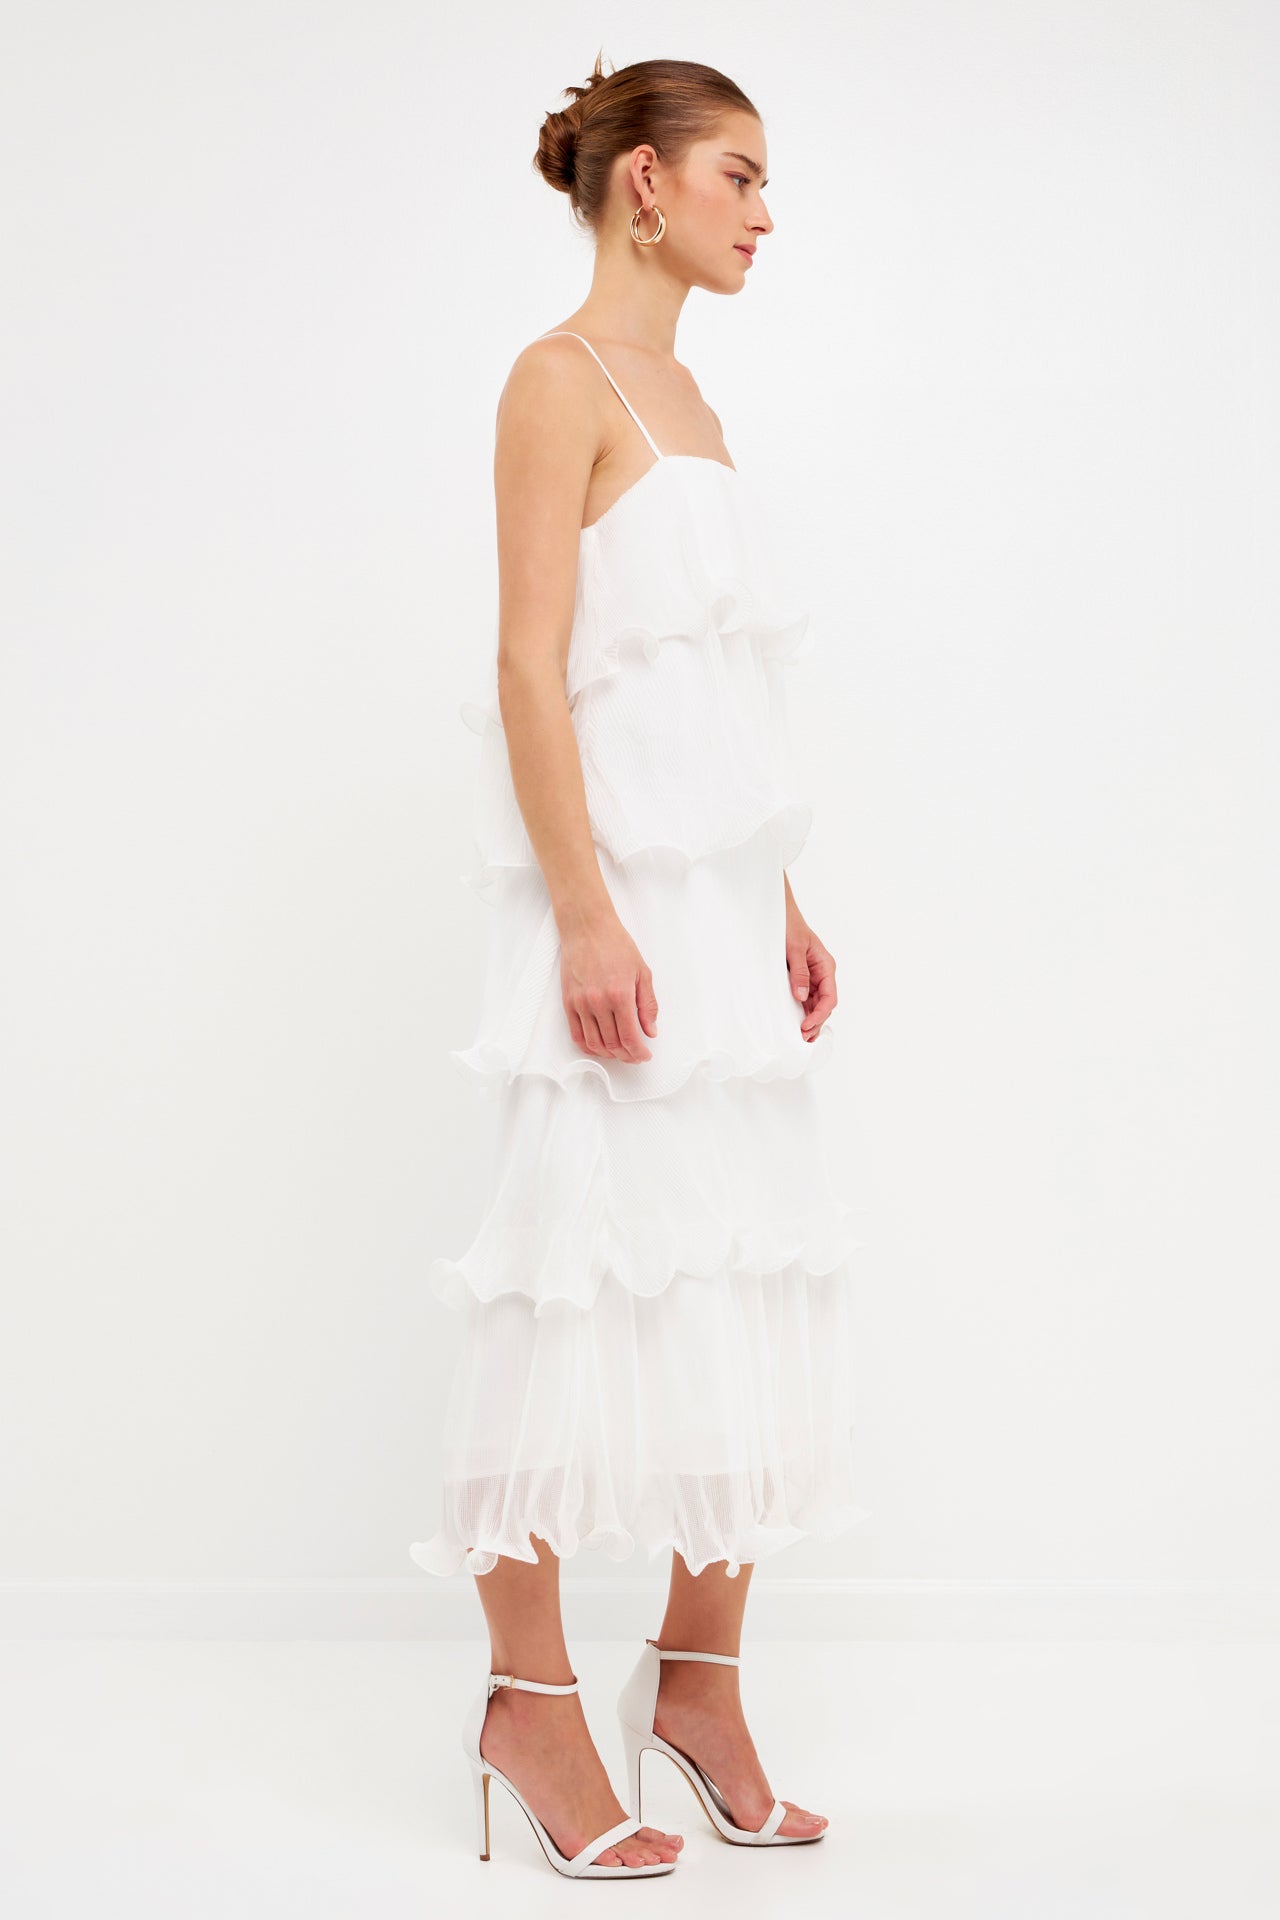 ENDLESS ROSE - Pleated Tiered Long Dress - DRESSES available at Objectrare